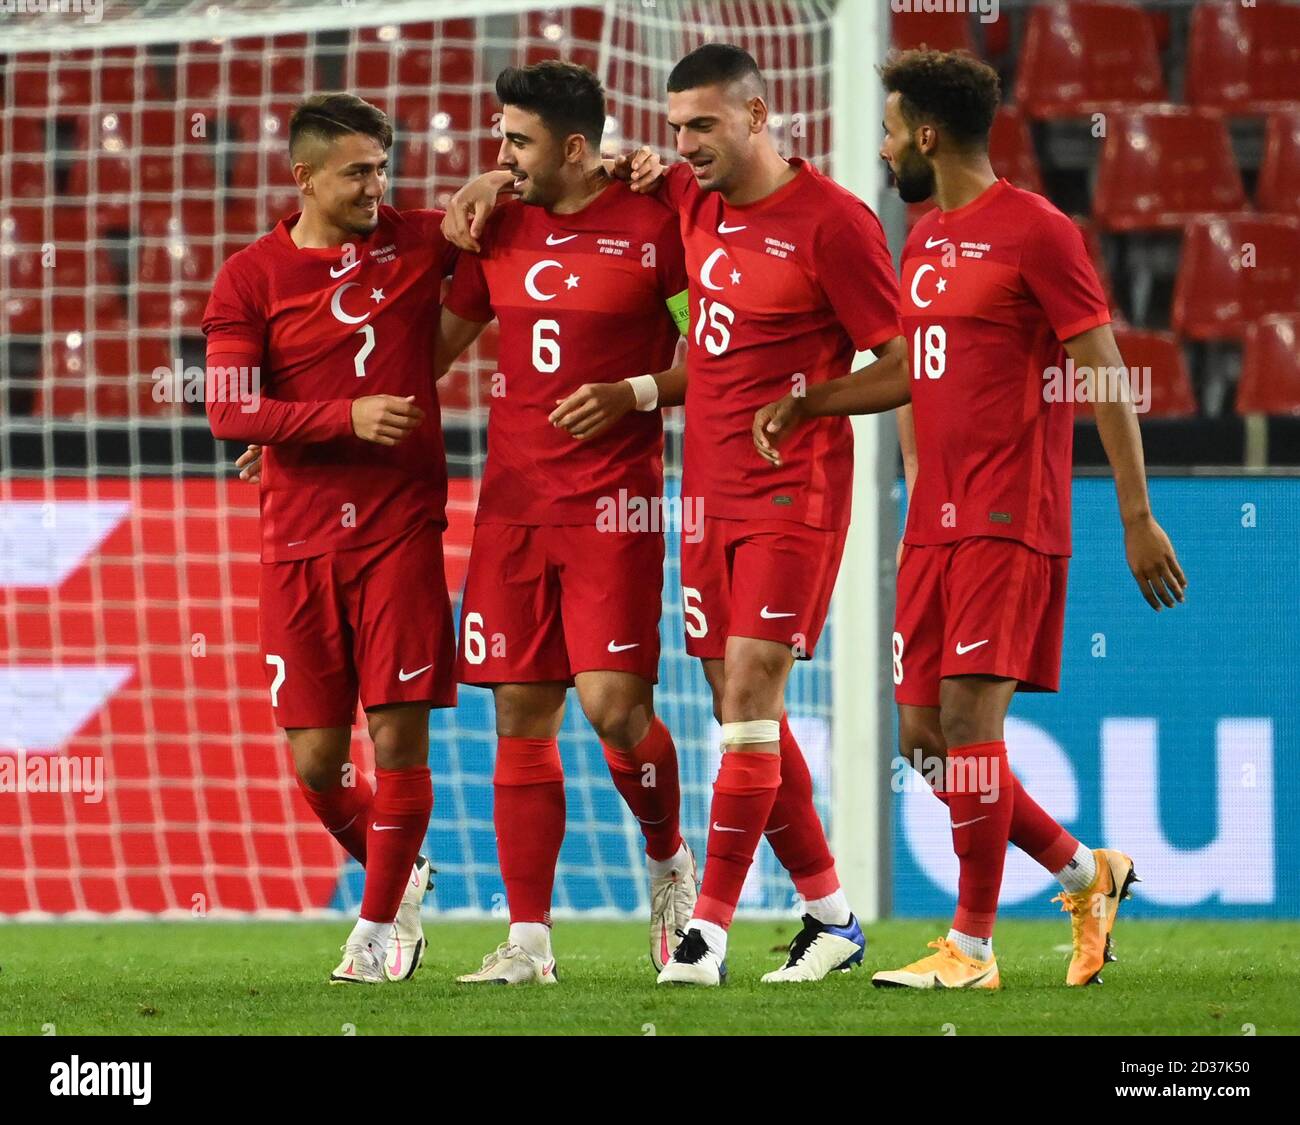 Cologne, Germany. 07th Oct, 2020. Football: international matches, Germany - Turkey in the RheinEnergieStadion. Ozan Tufan (2nd from left, Turkey) celebrates with Cengiz Ünder (l), Merih Demiral and Nazim Sangare (r) his 1:1 equaliser. Credit: Federico Gambarini/dpa/Alamy Live News Stock Photo